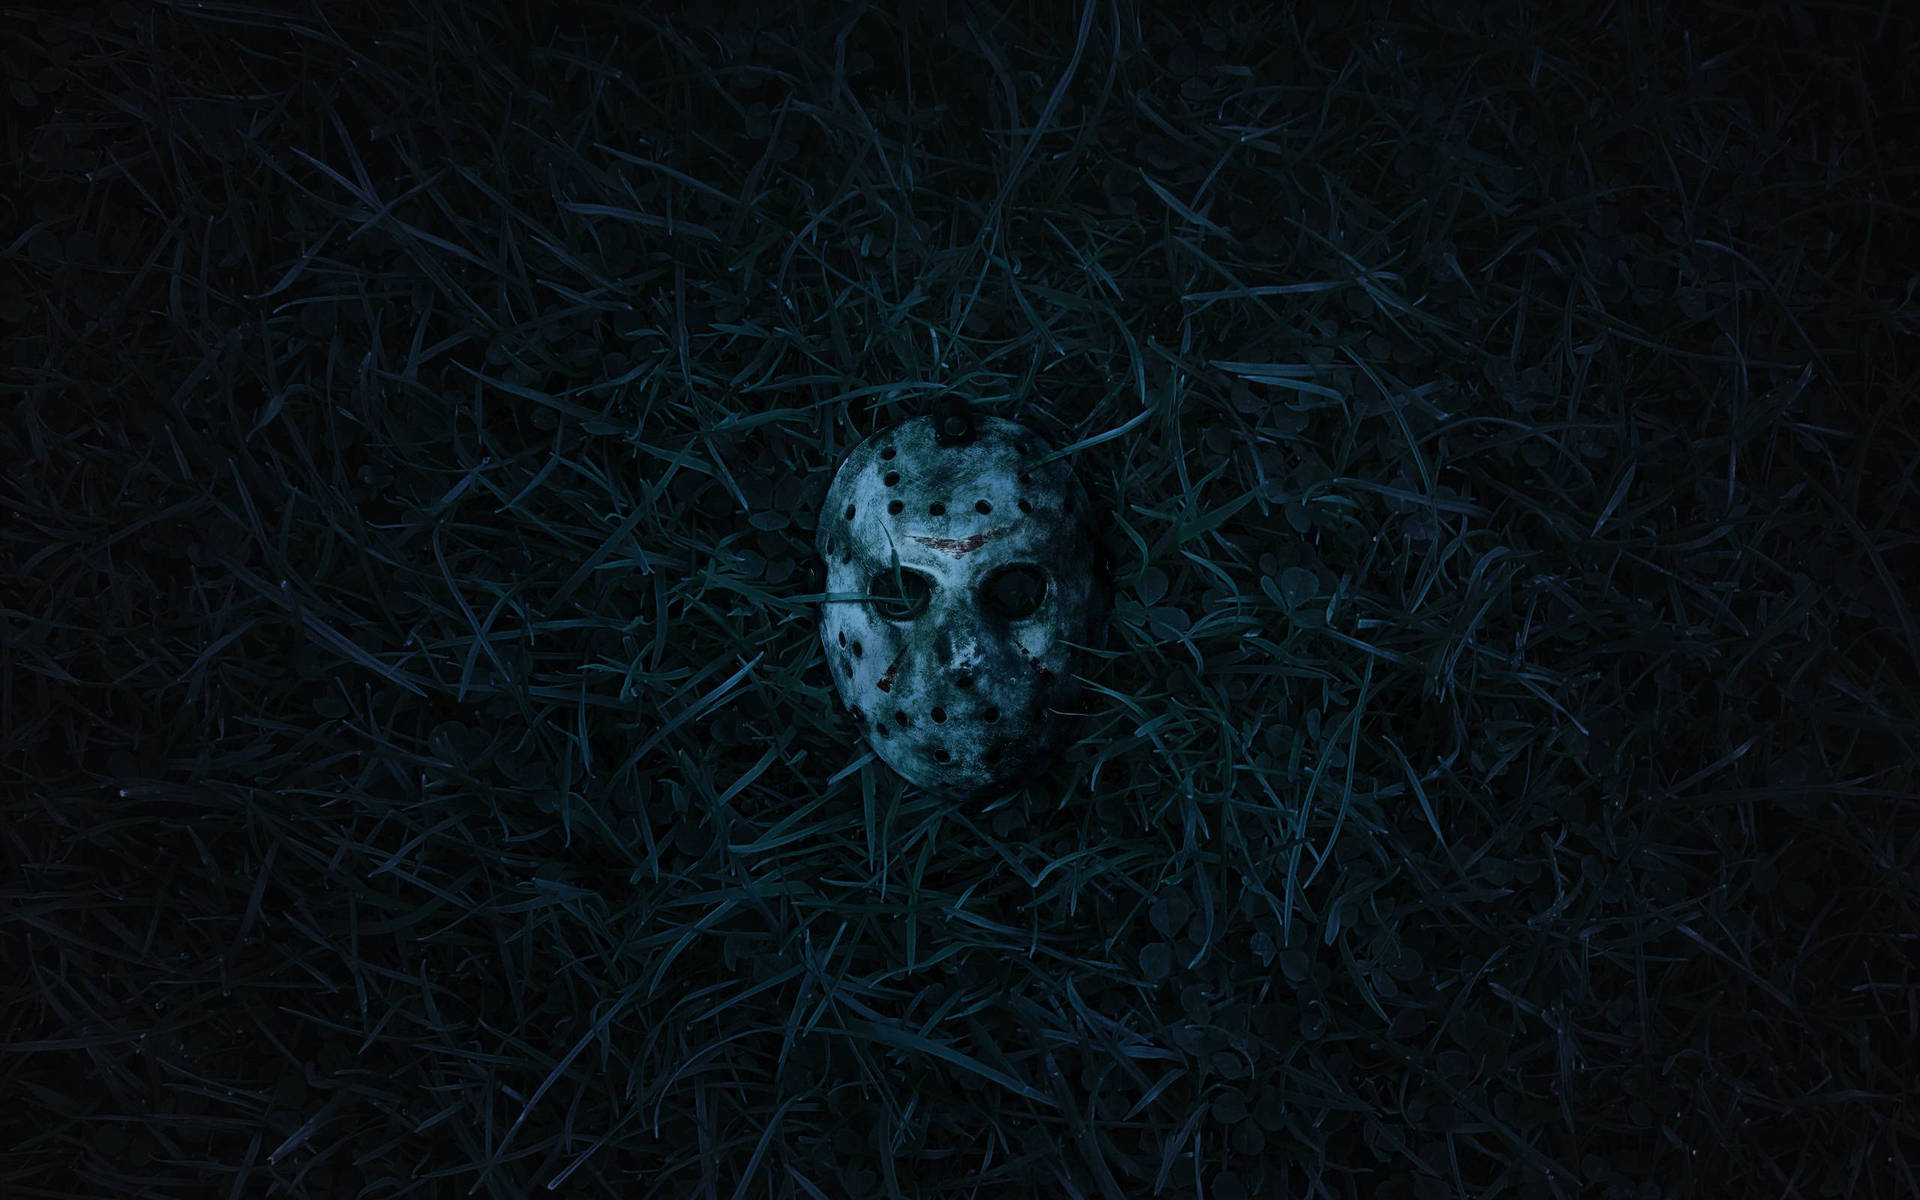 Friday The 13th Mask In Grass Wallpaper